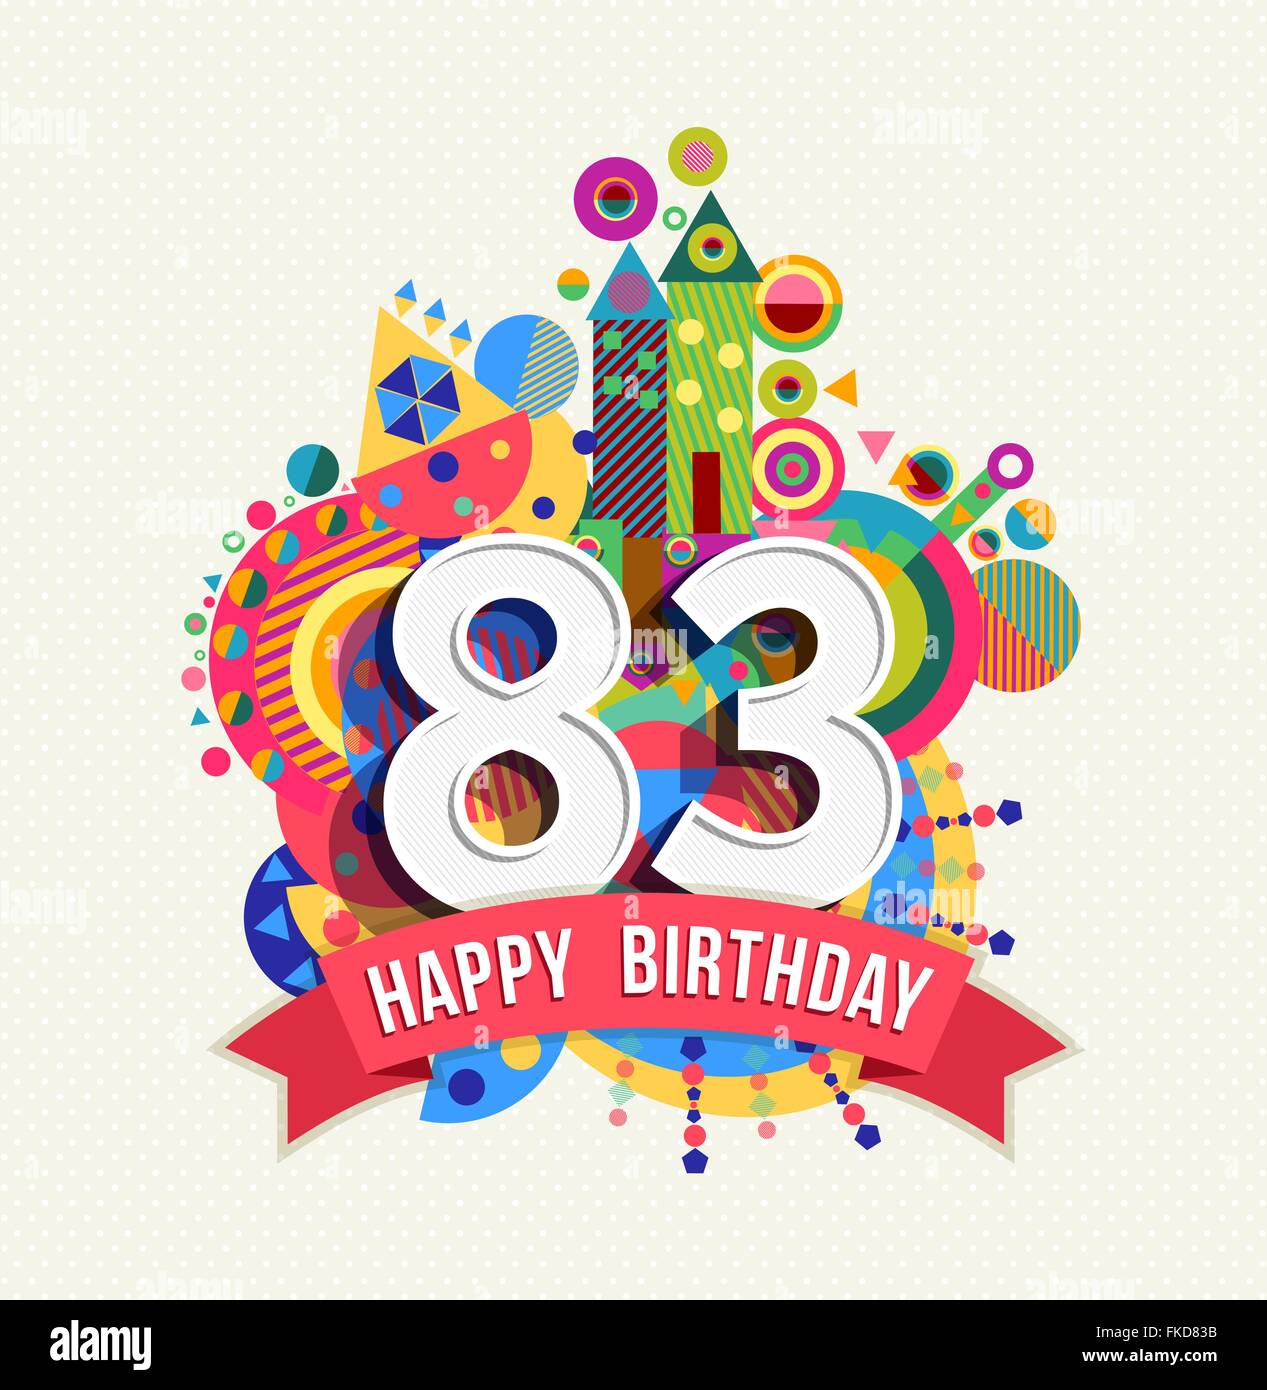 Happy Birthday eighty three 83 year, fun celebration anniversary greeting card with number, text label and colorful geometry Stock Vector